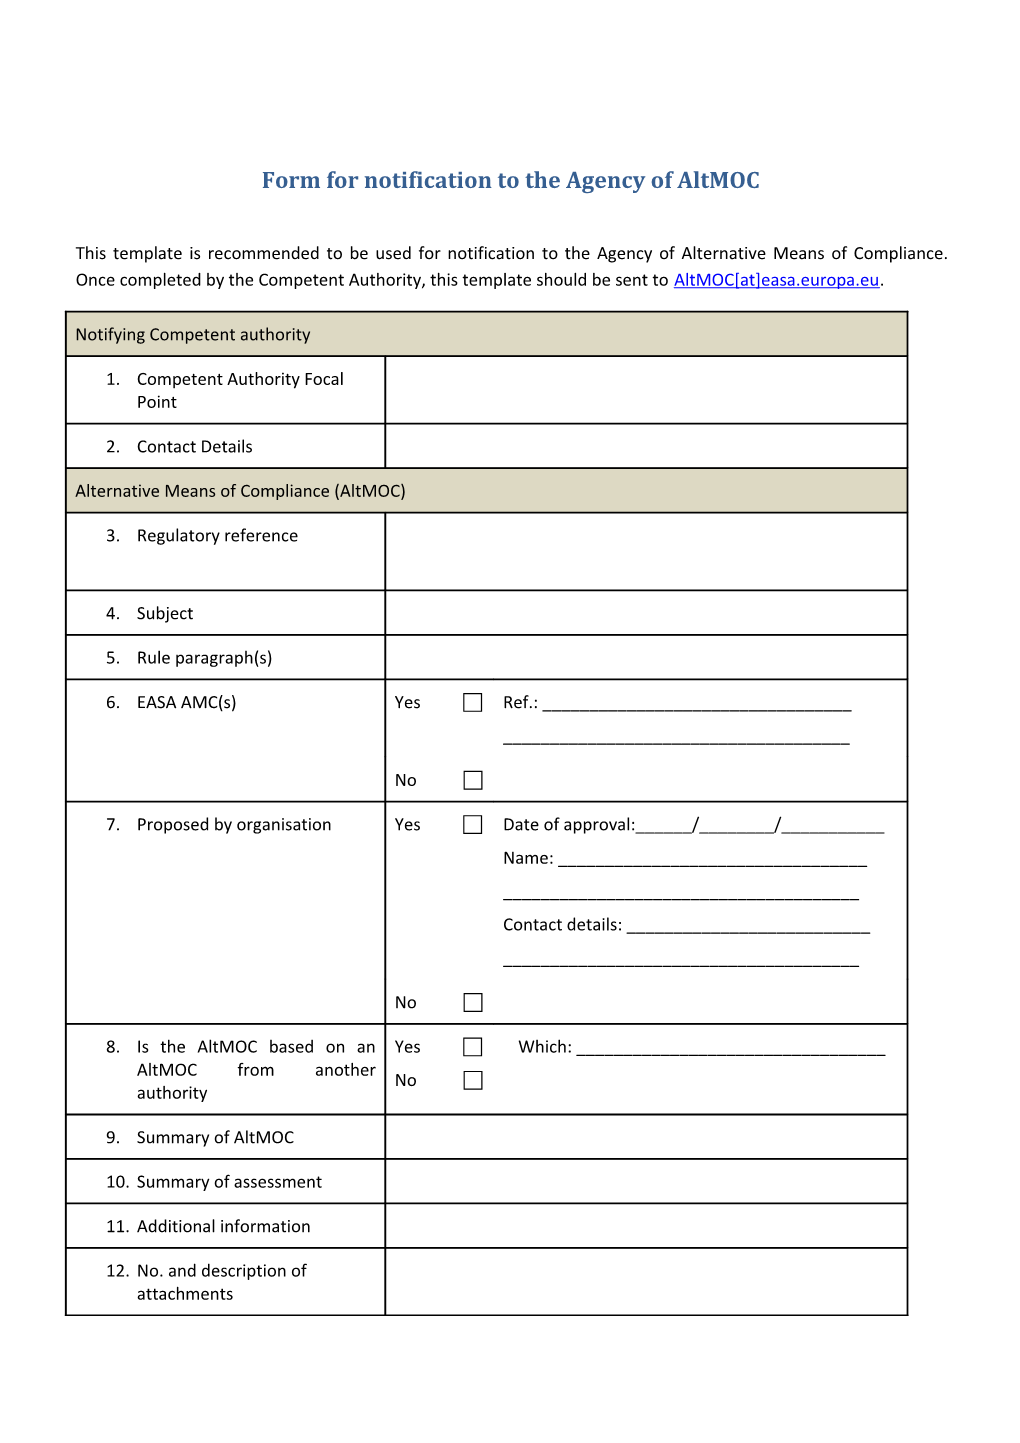 Form for Notification to the Agency of Altmoc